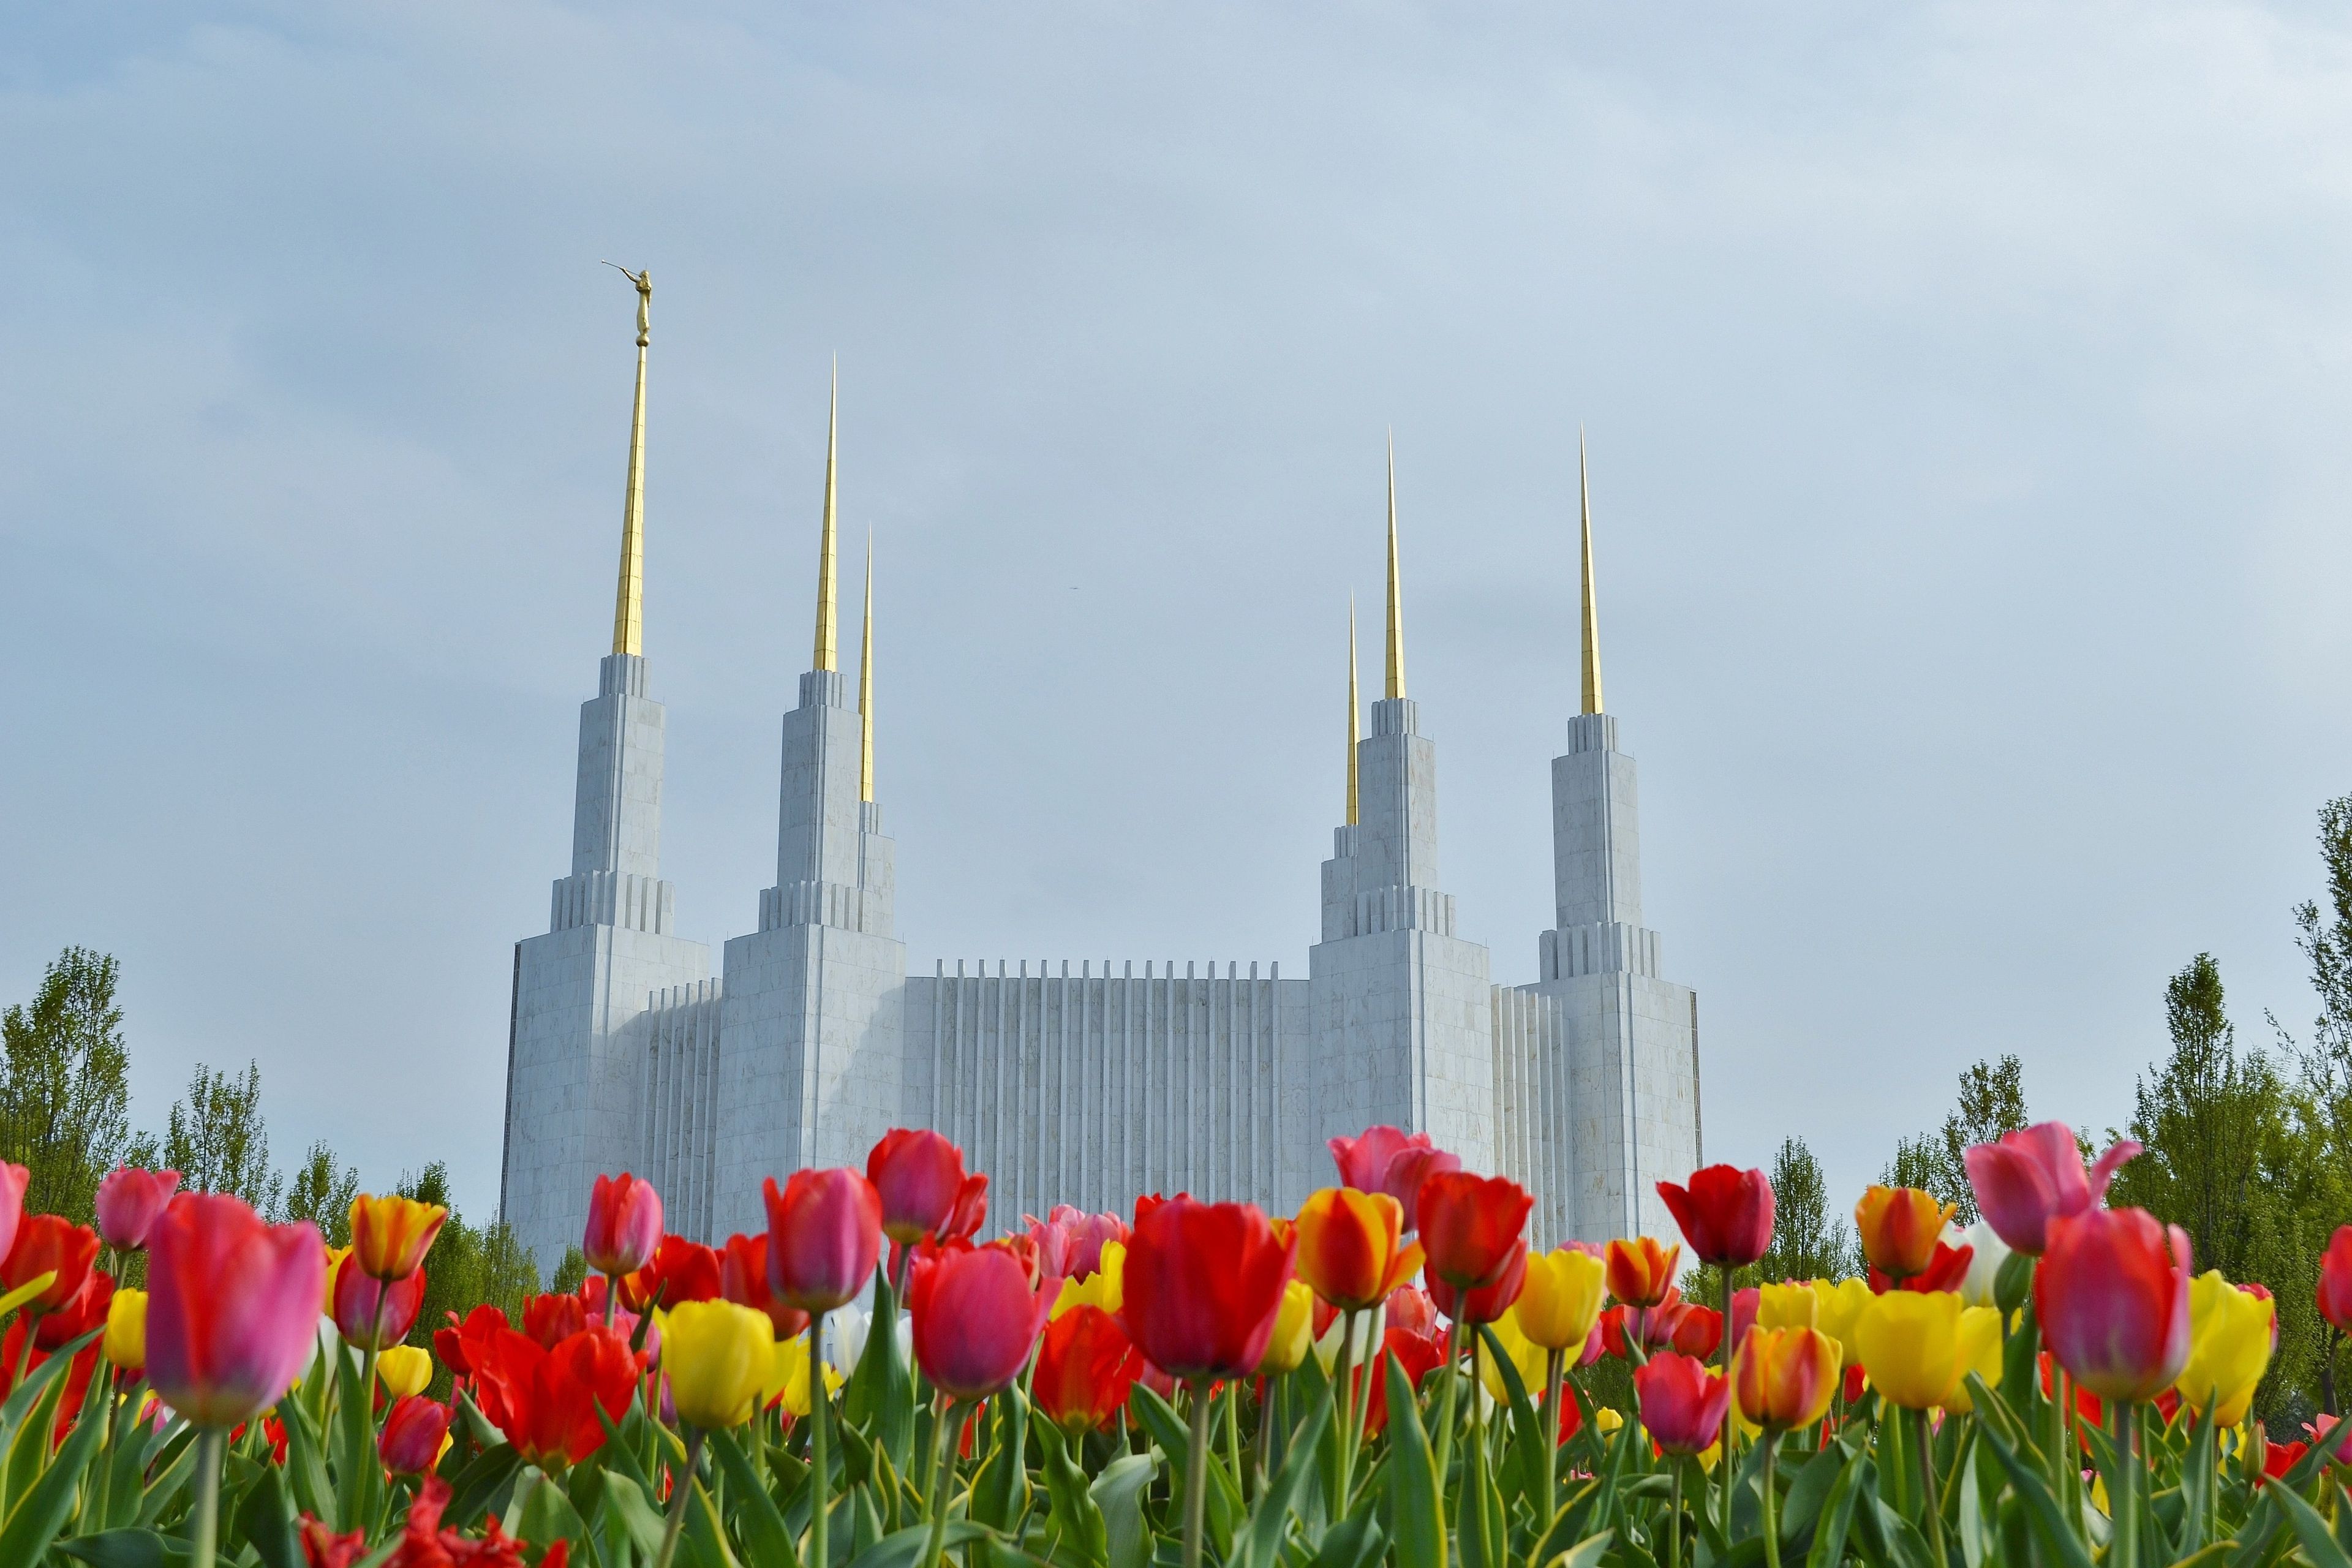 The Washington D.C. Temple during spring, with flowers.